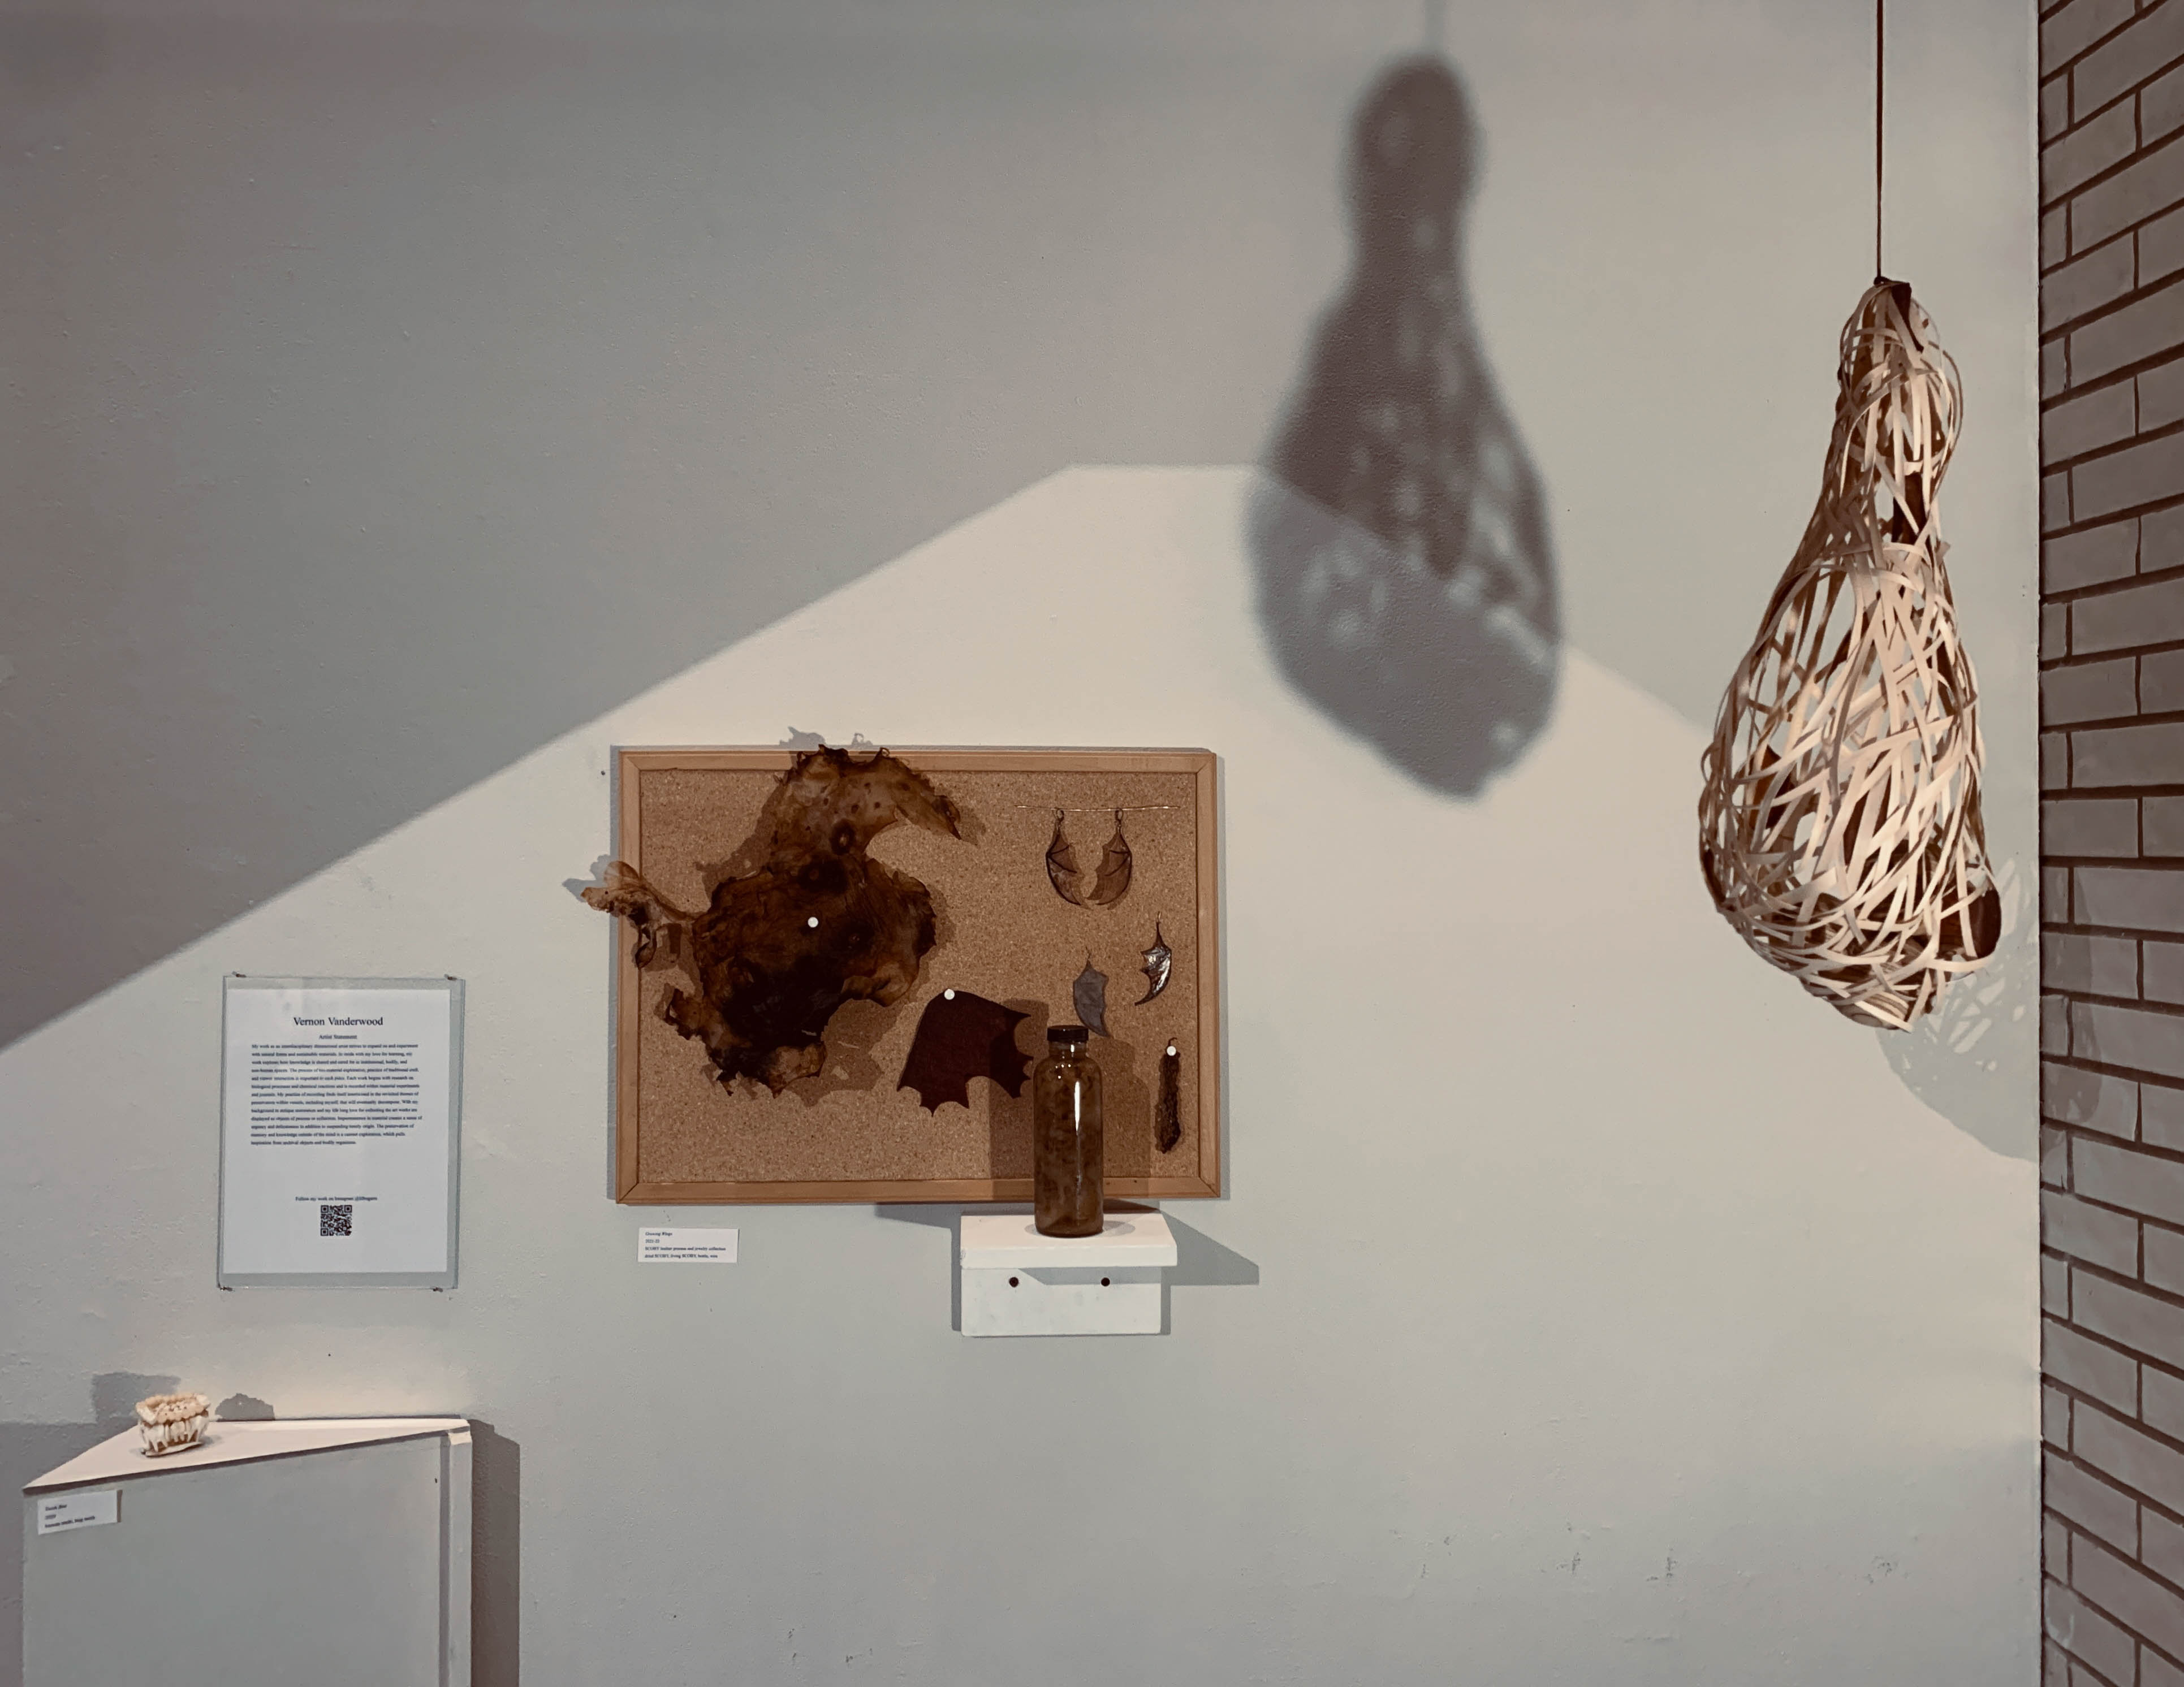 Installation of Vernon's work: hanging paper sculpture and a bulletin board displaying wings and natural finds